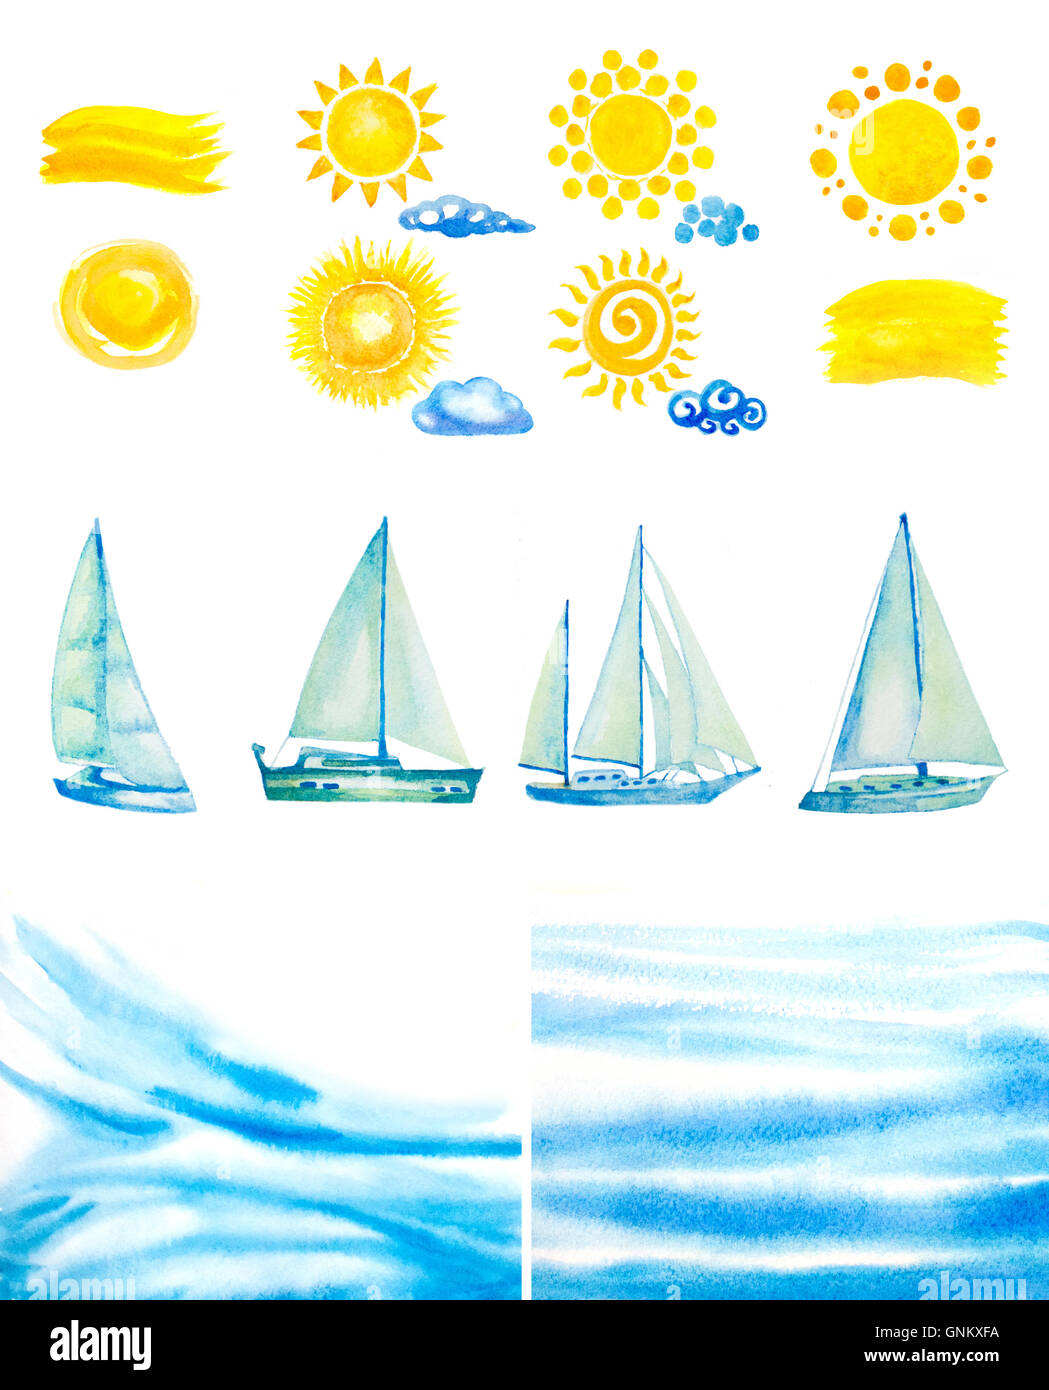 set of watercolor sun,clouds,yachts,abstract water waves Stock Photo